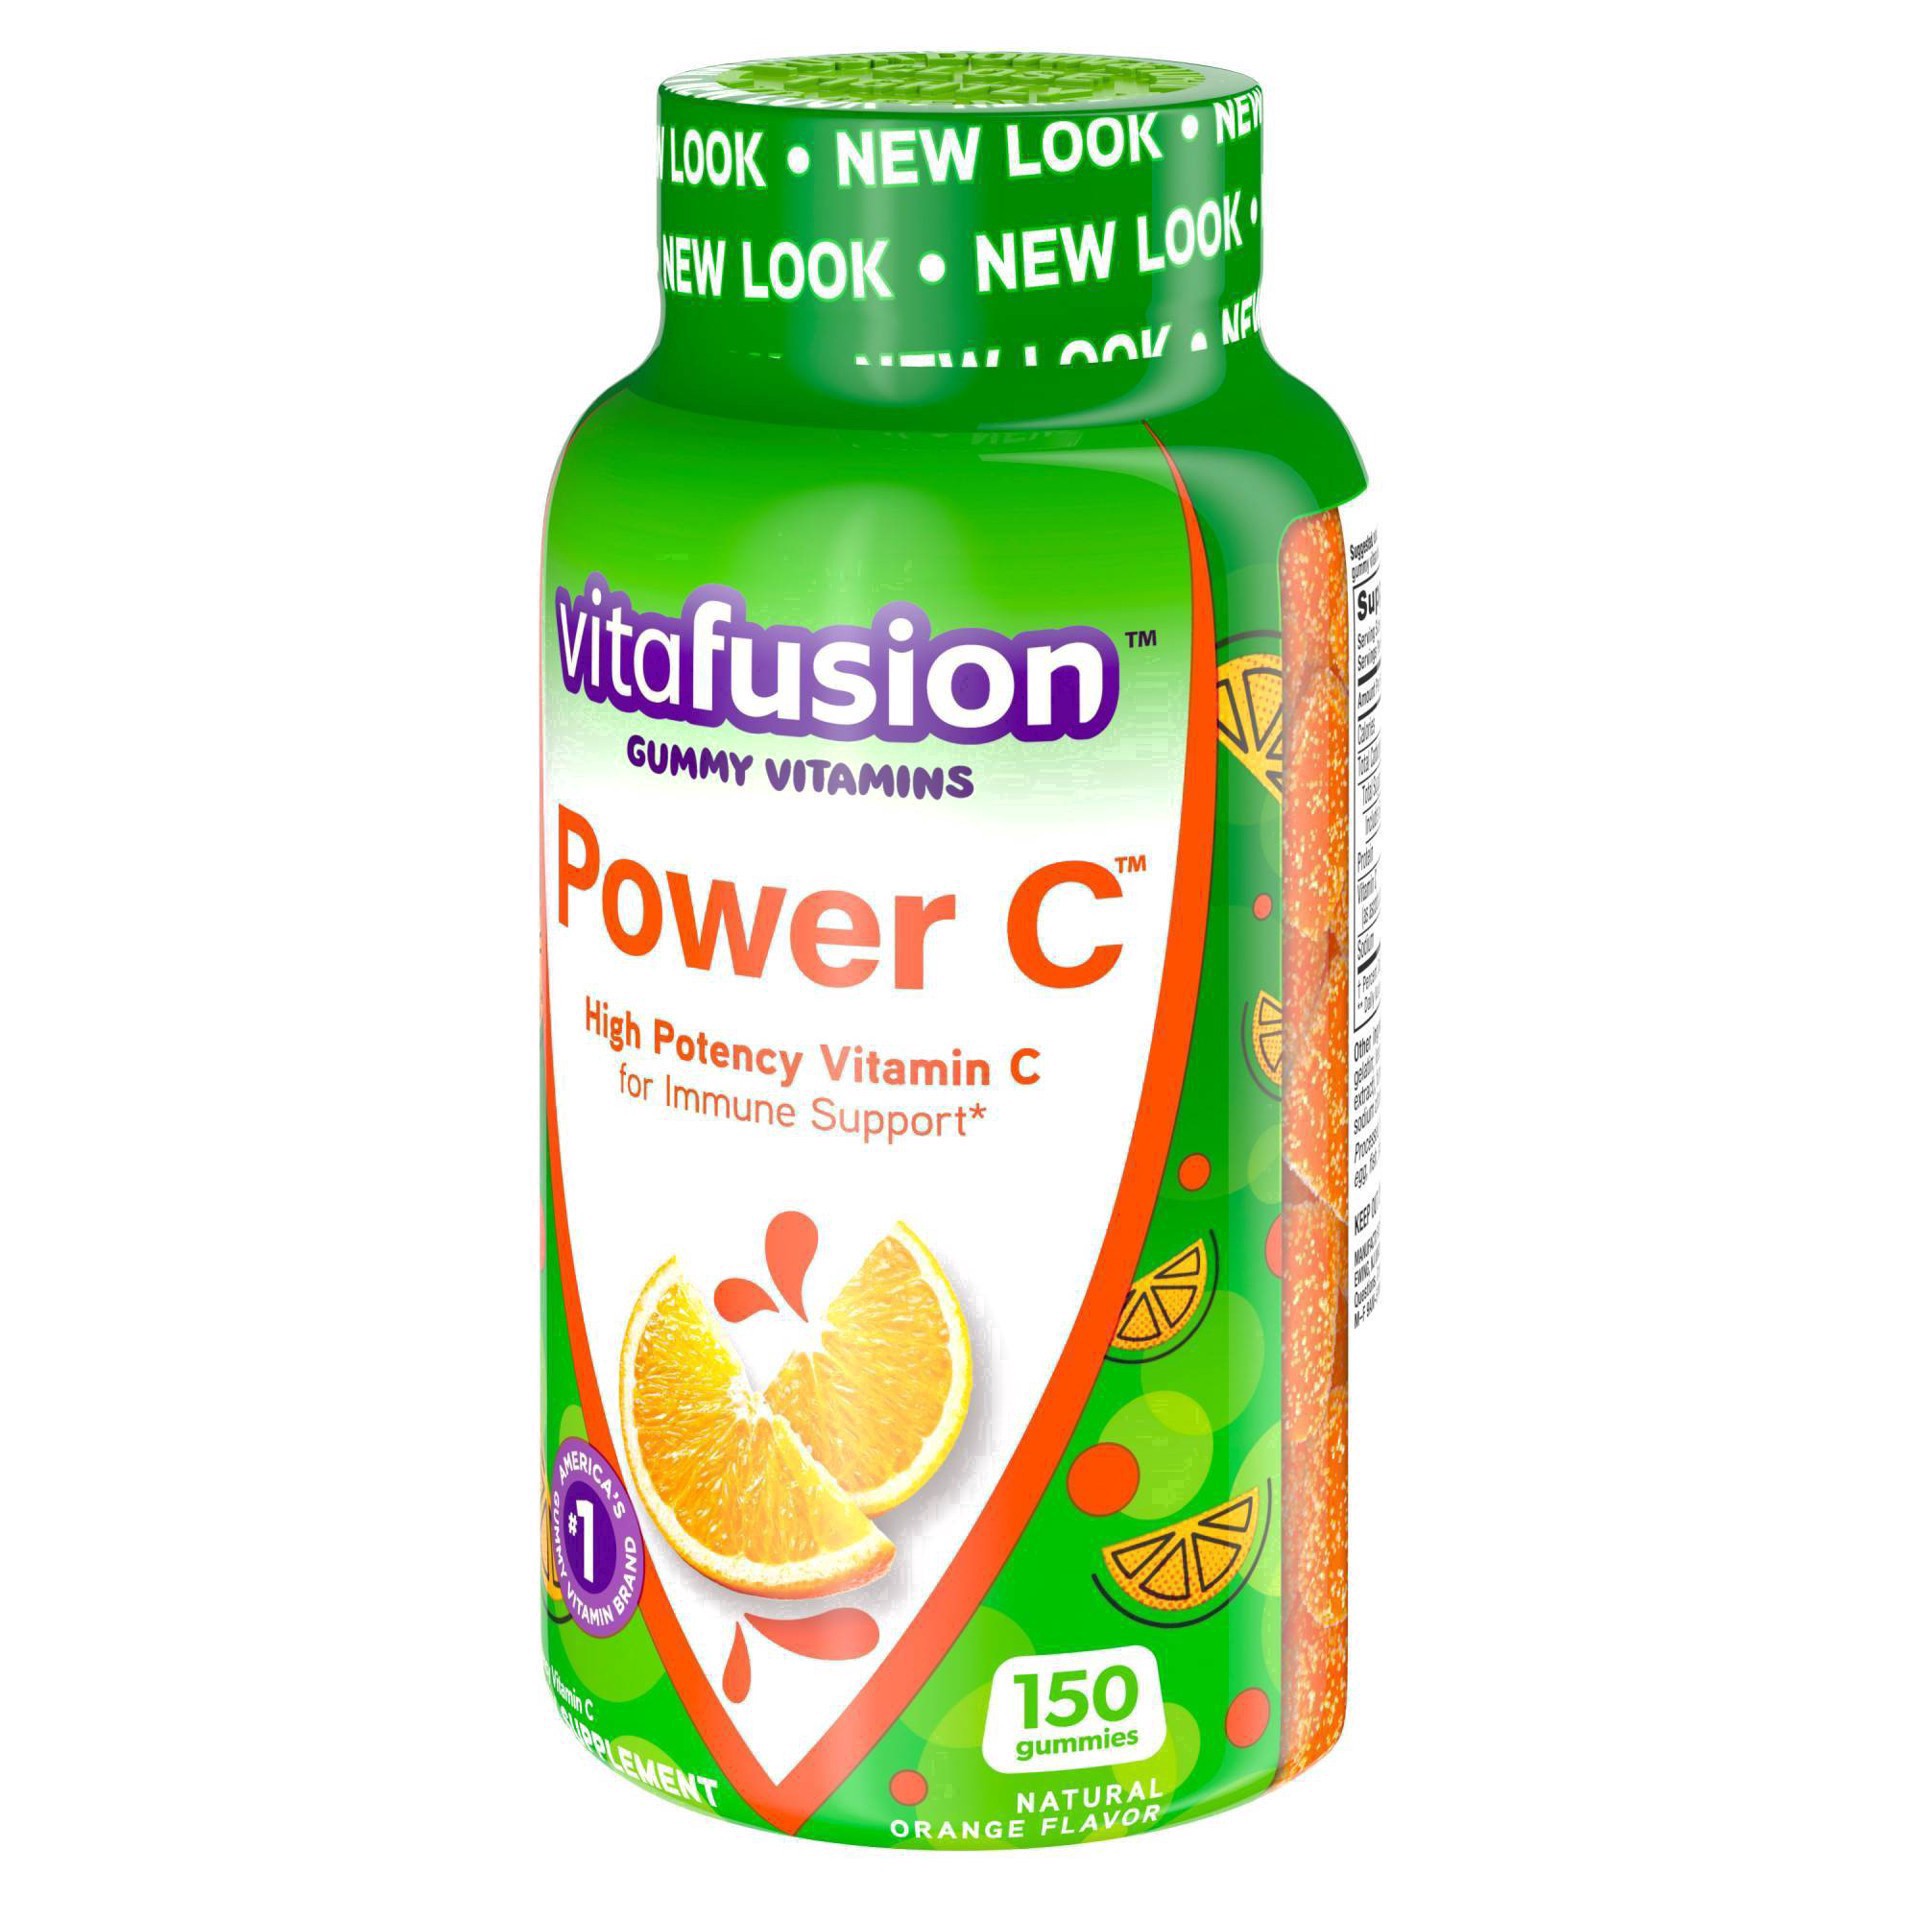 slide 15 of 78, vitafusion Power C Gummy Immune Support* with vitamin C, Delicious Orange Flavor, 150ct (50 day supply), from America's Number One Gummy Vitamin Brand, 150 cnt